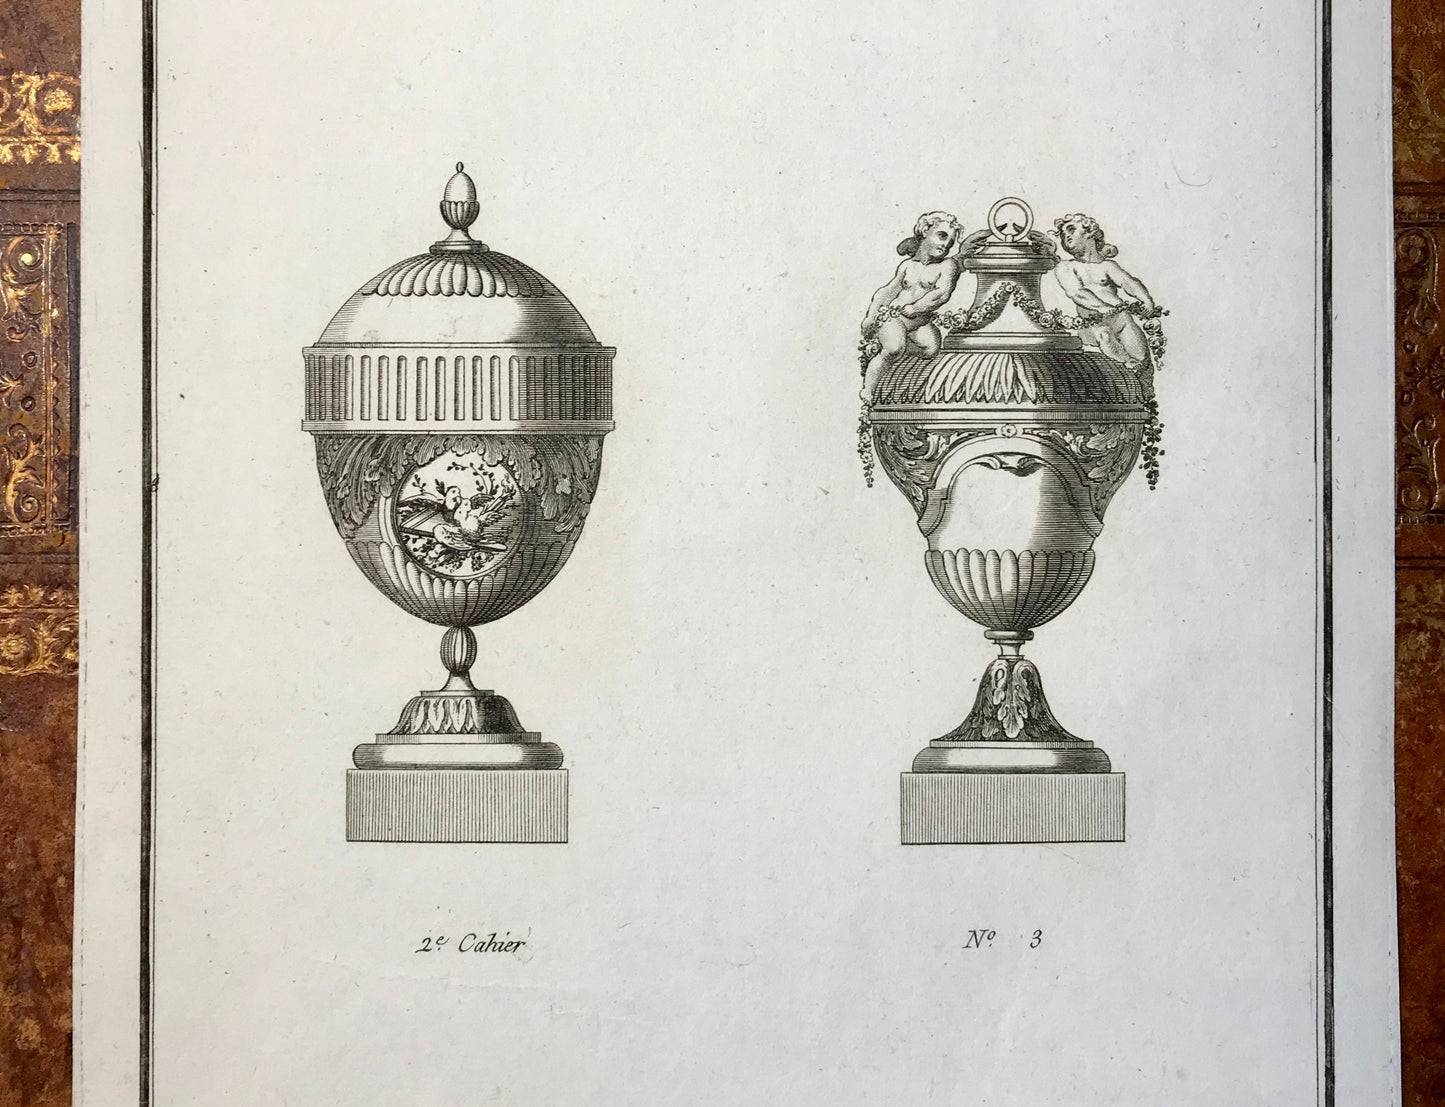 A Set of 6 Original Antique Engravings Showing Designs for Vases. Numbered 1 to 6. By Pierre de Fontanieu. Dated 1770. 36 x 24.2 cms.